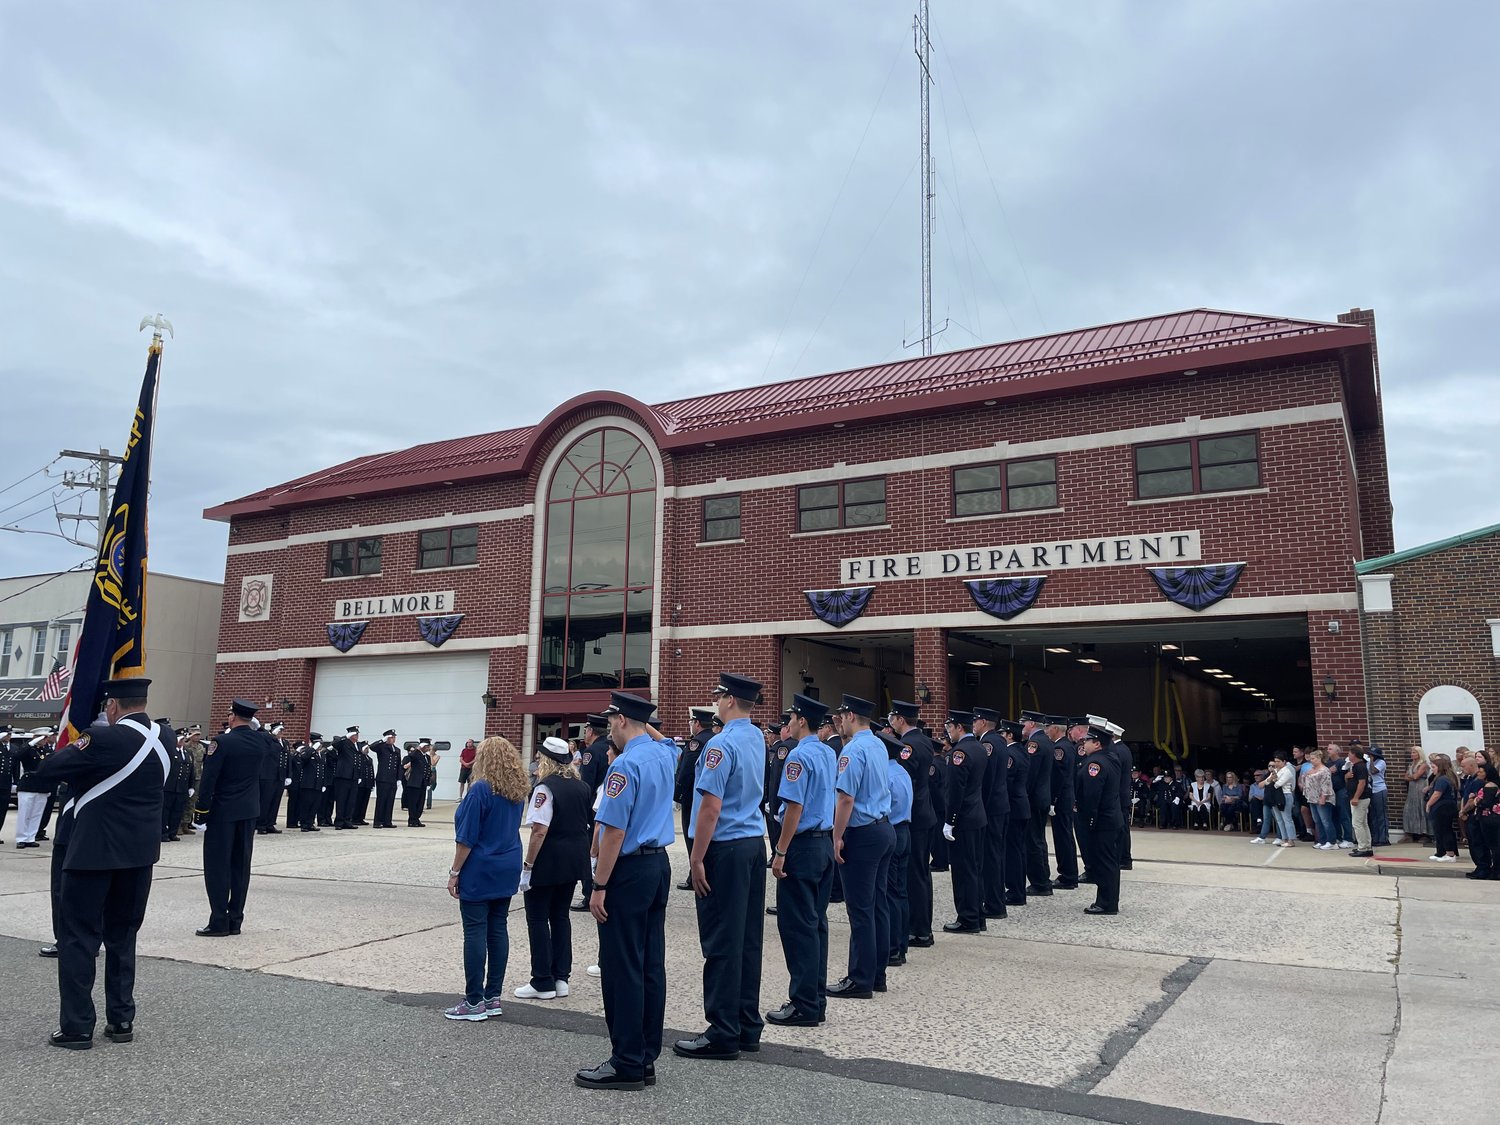 At the Bellmore Fire Department’s Sept. 11 memorial ceremony on Sunday, department members from both the Bellmore and North Bellmore departments stood in salute to honor and remember the fallen.